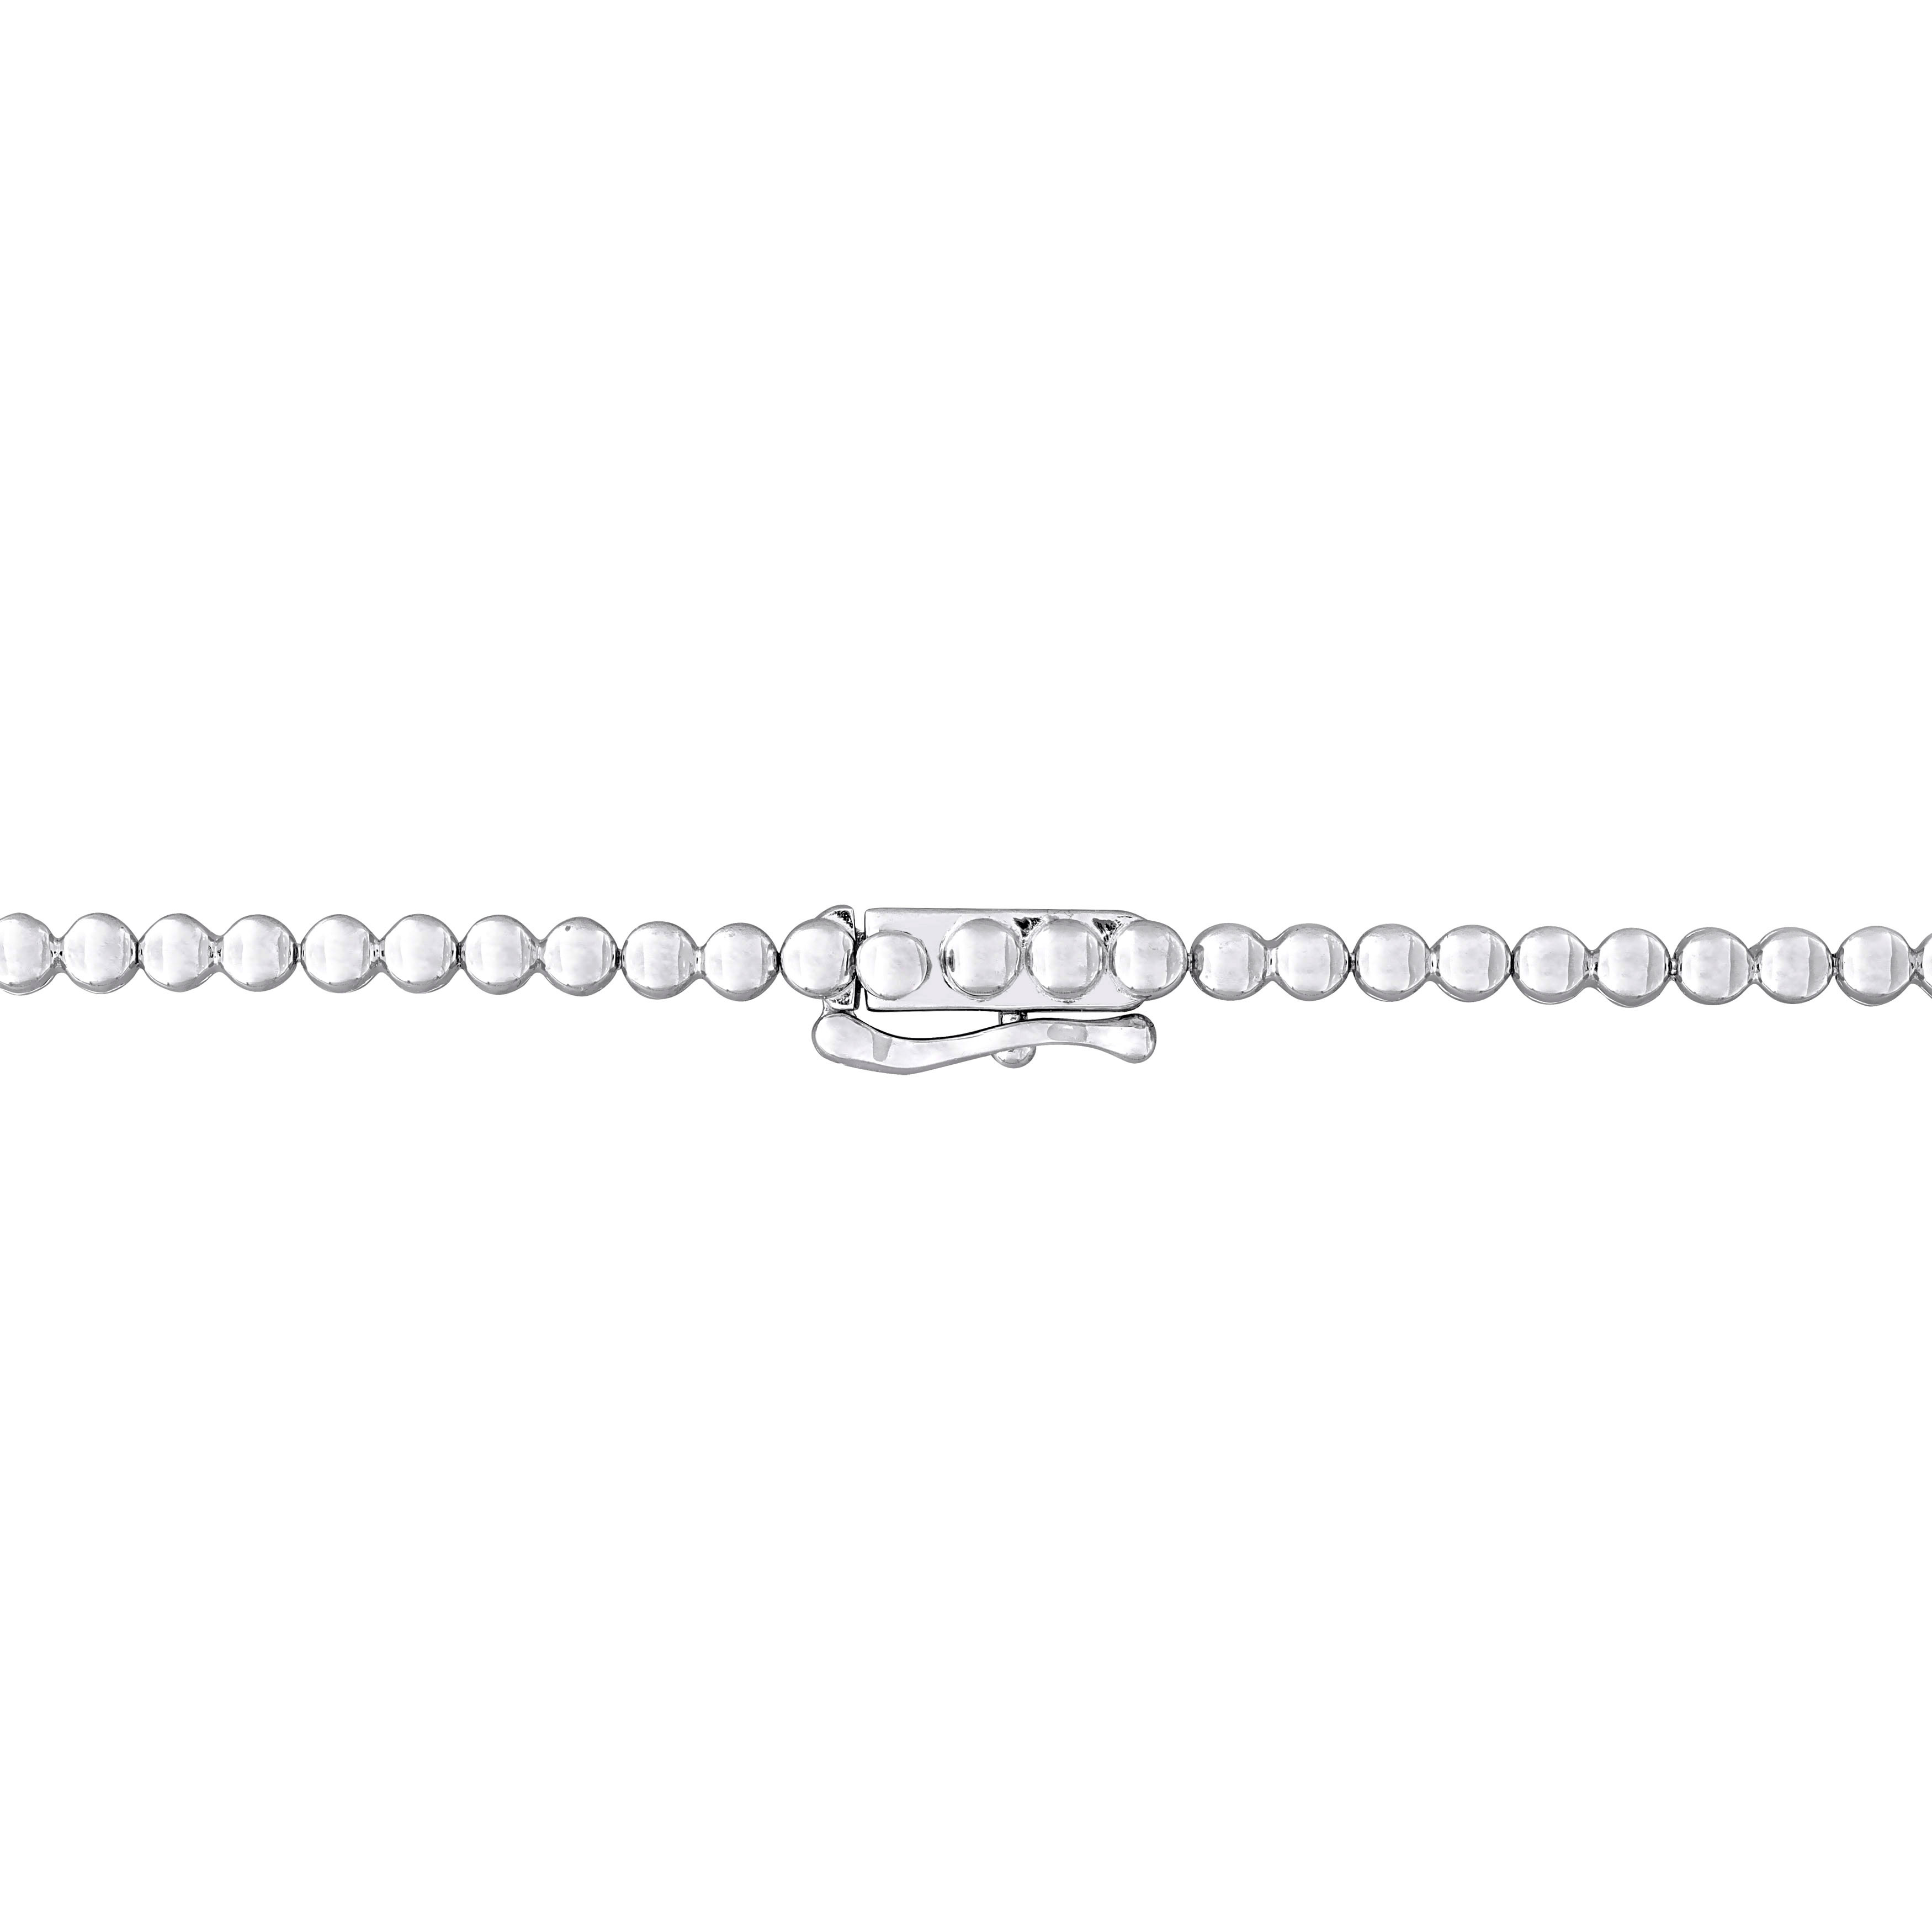 21 1/2 CT TGW Created White Sapphire Fashion Necklace in Sterling Silver - 17 in.